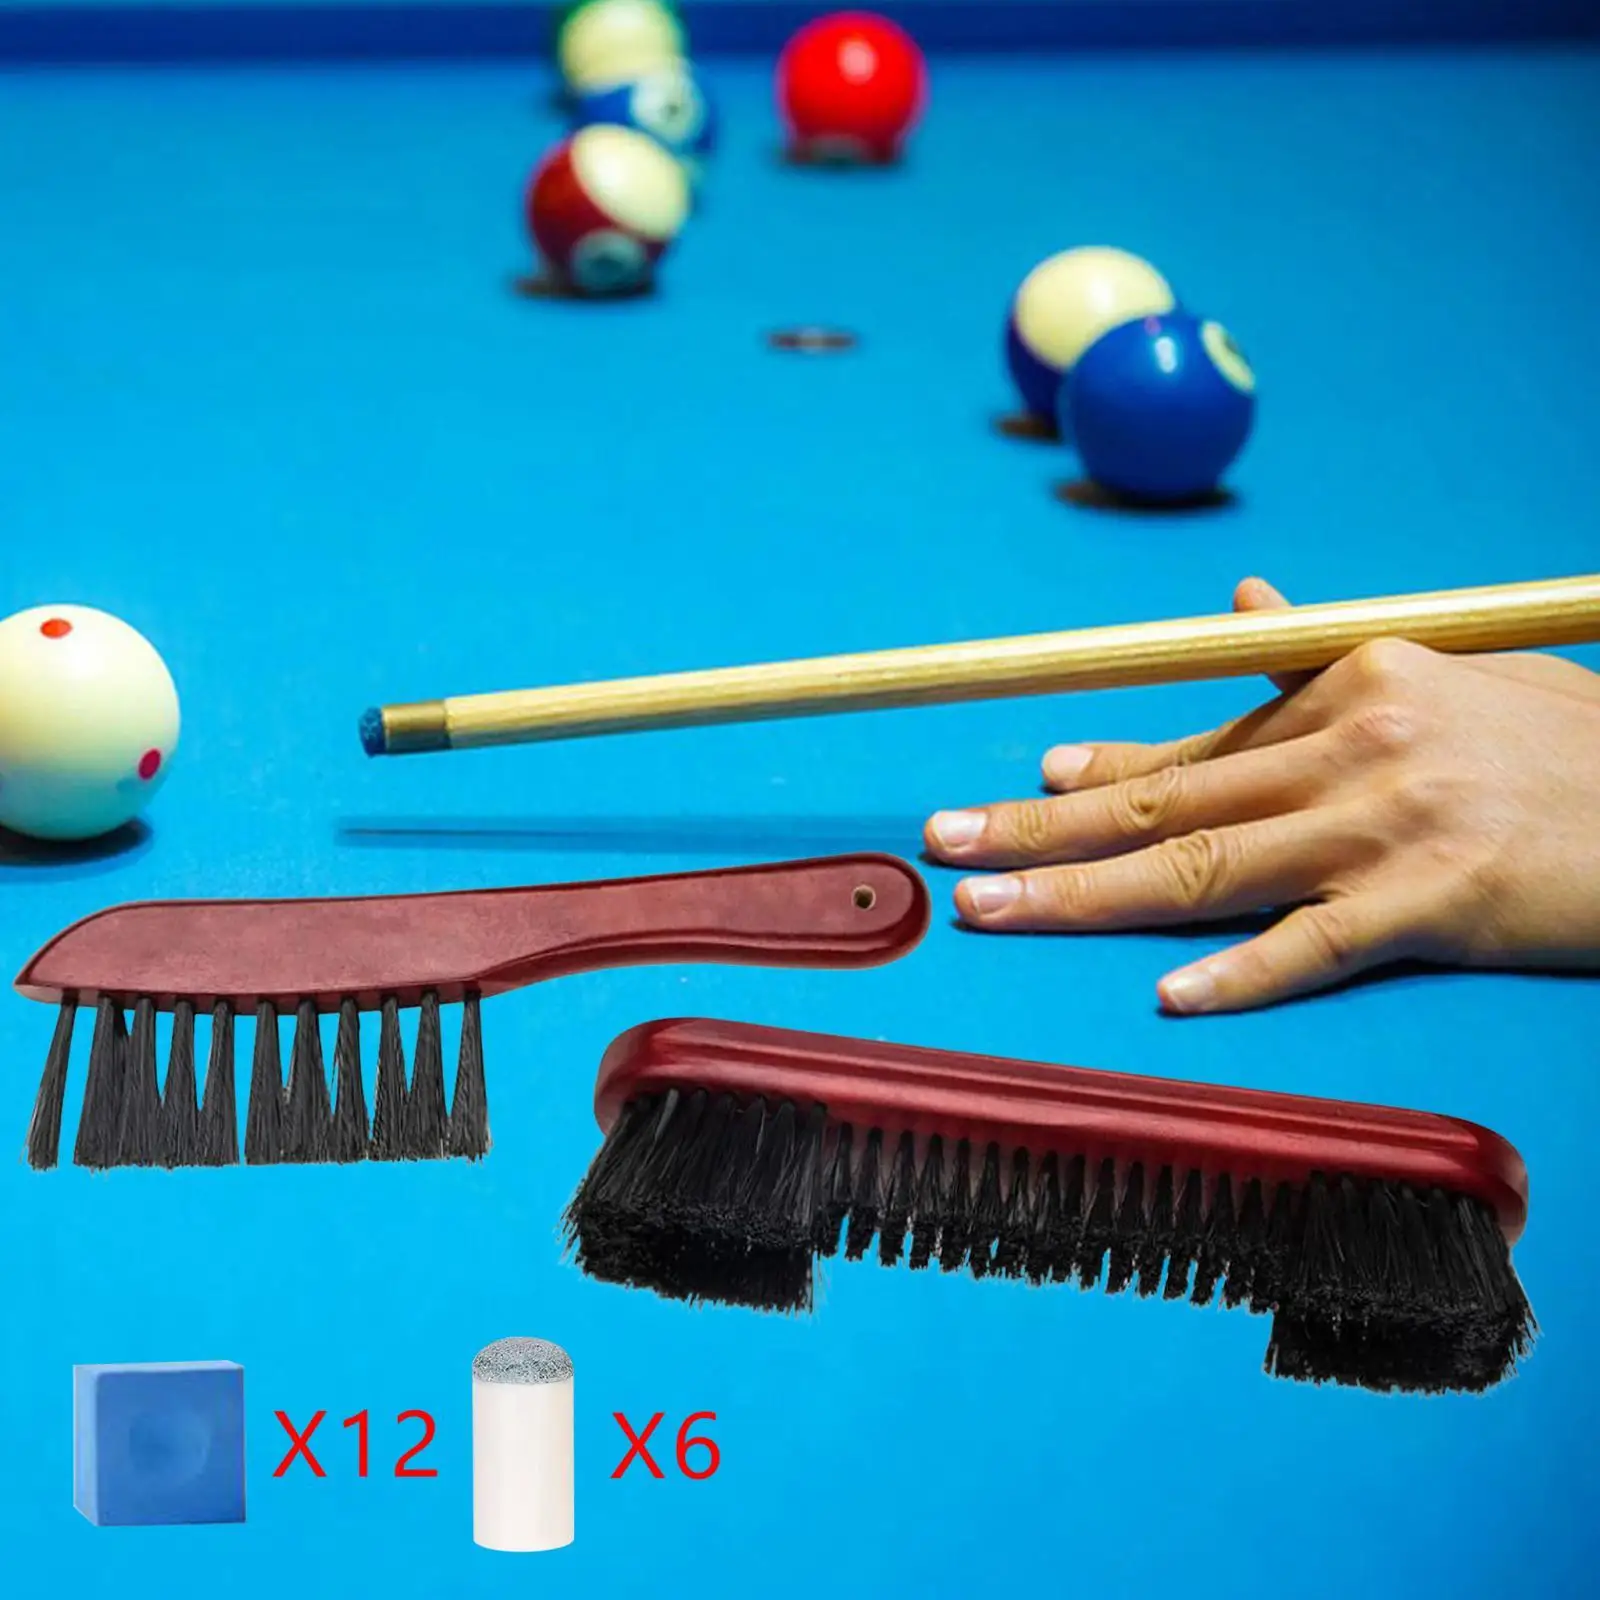 Wooden Cleaning Brush Set Wipe Billiards Table Accessories Slip on Pool Cue Tip Convenient Lightweight Pool Table Brush